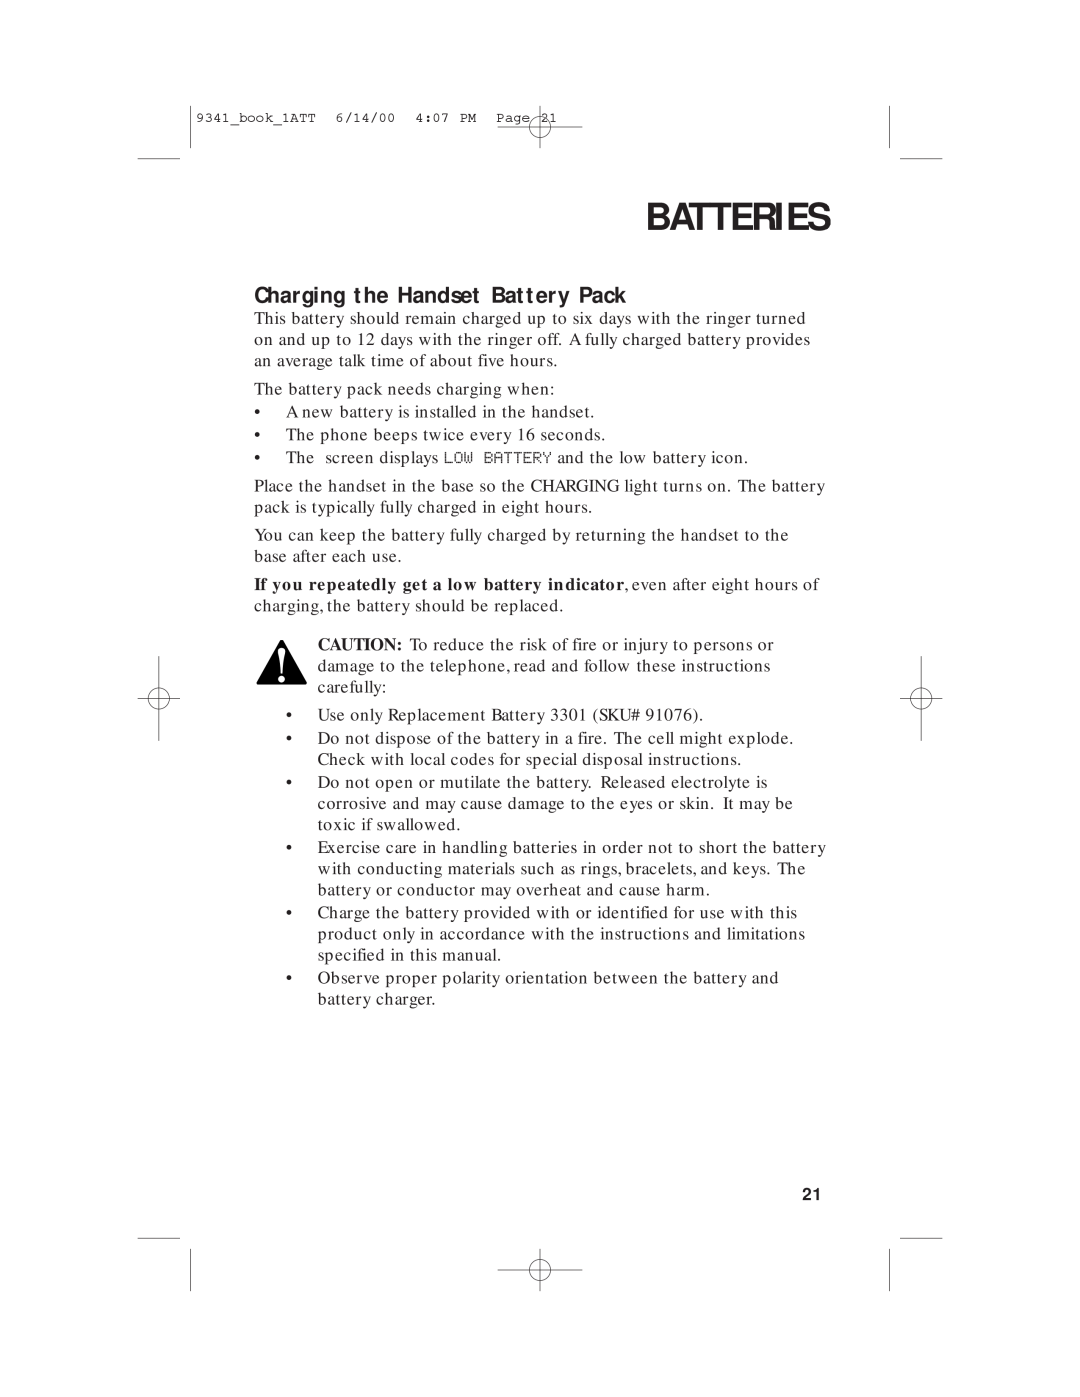 AT&T 9341 user manual Batteries, Charging the Handset Battery Pack 